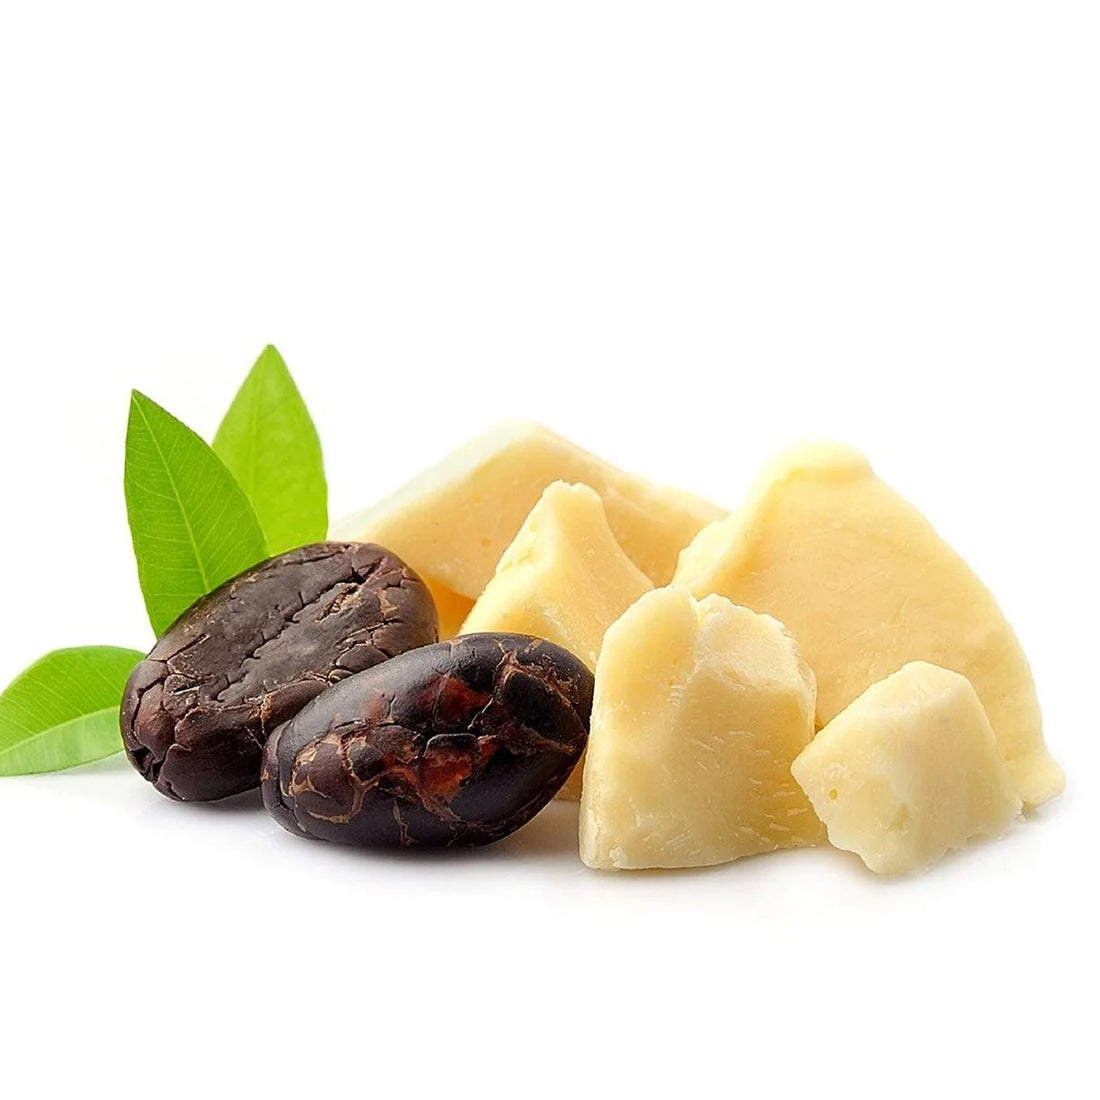 Cacao butter (also referred to as cocoa butter), is the edible fat that’s extracted from cocoa beans. In fact, around 55% of the bean’s weight is from the cacao butter.